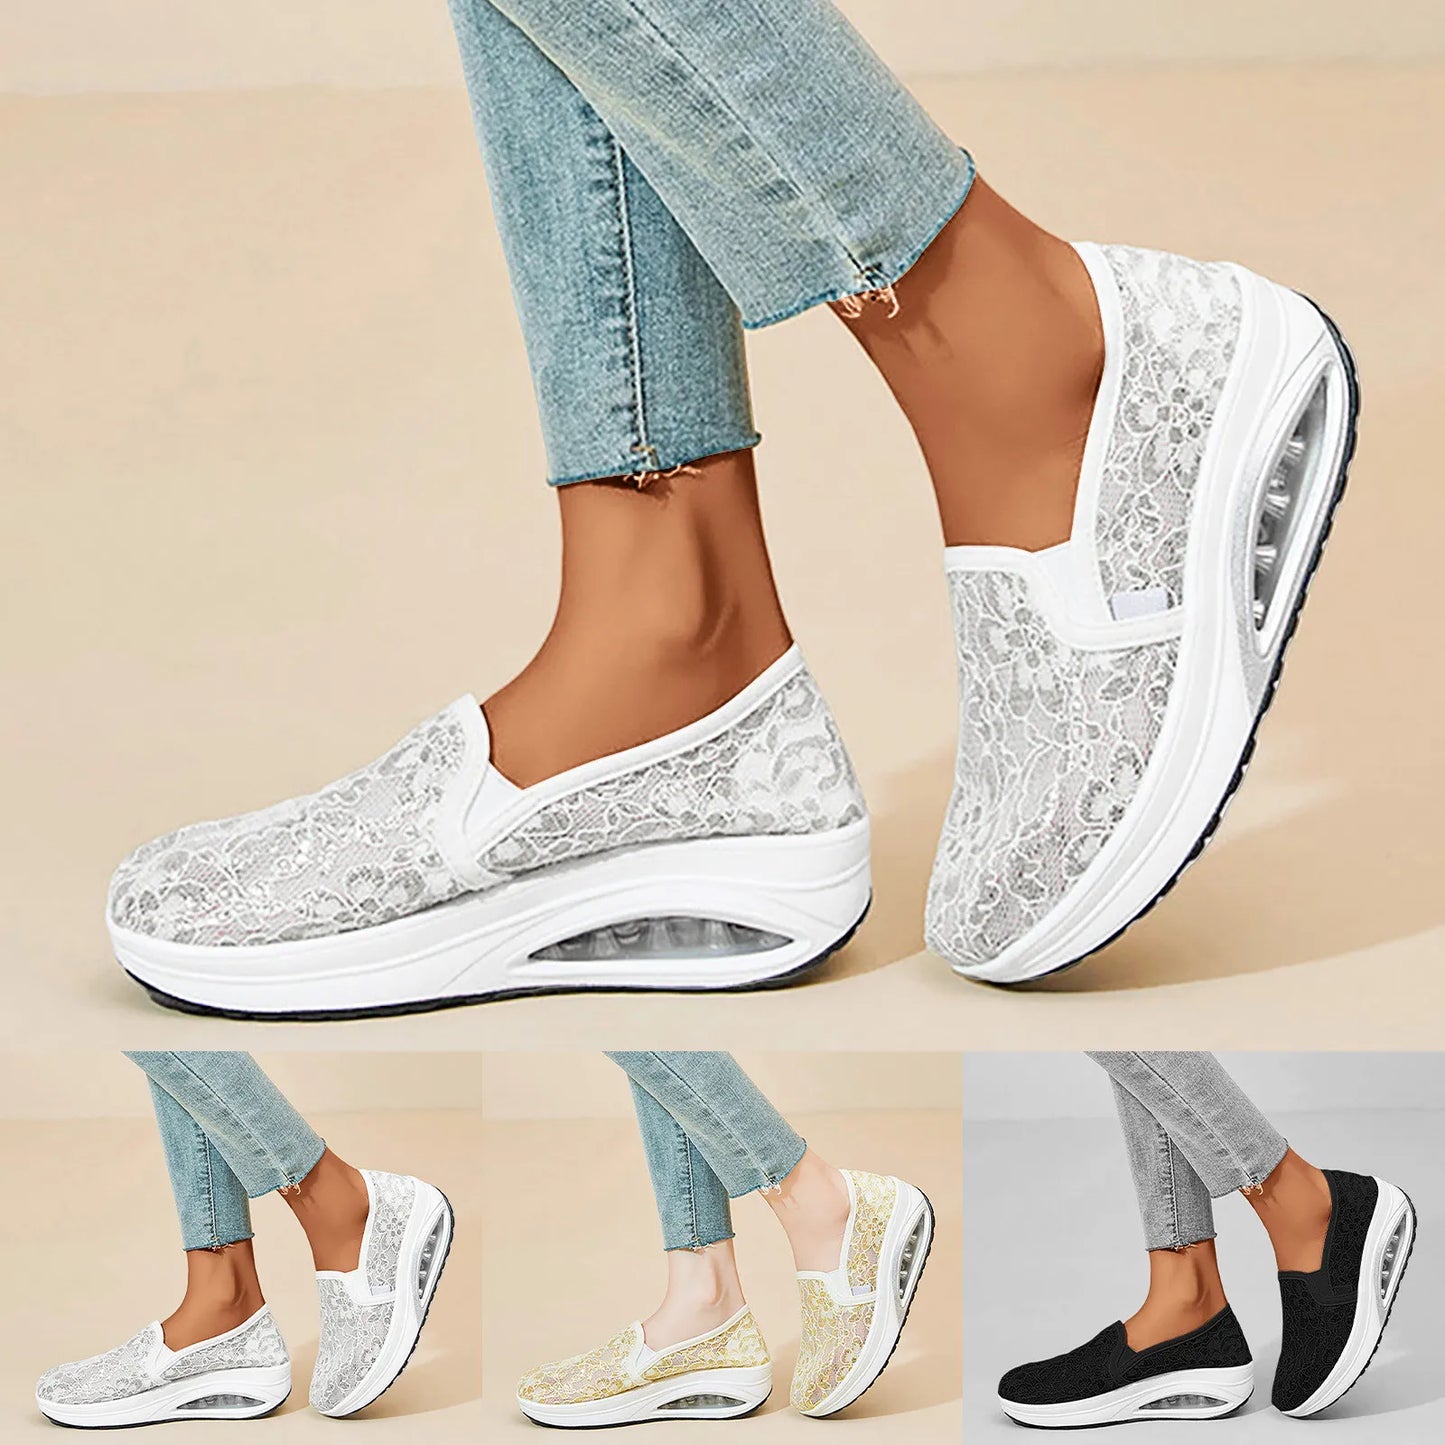 Women's Open Toe Wedge Sandals Hollow Out Running Shoes/For Women In The Summer New Mesh Breathable Casual